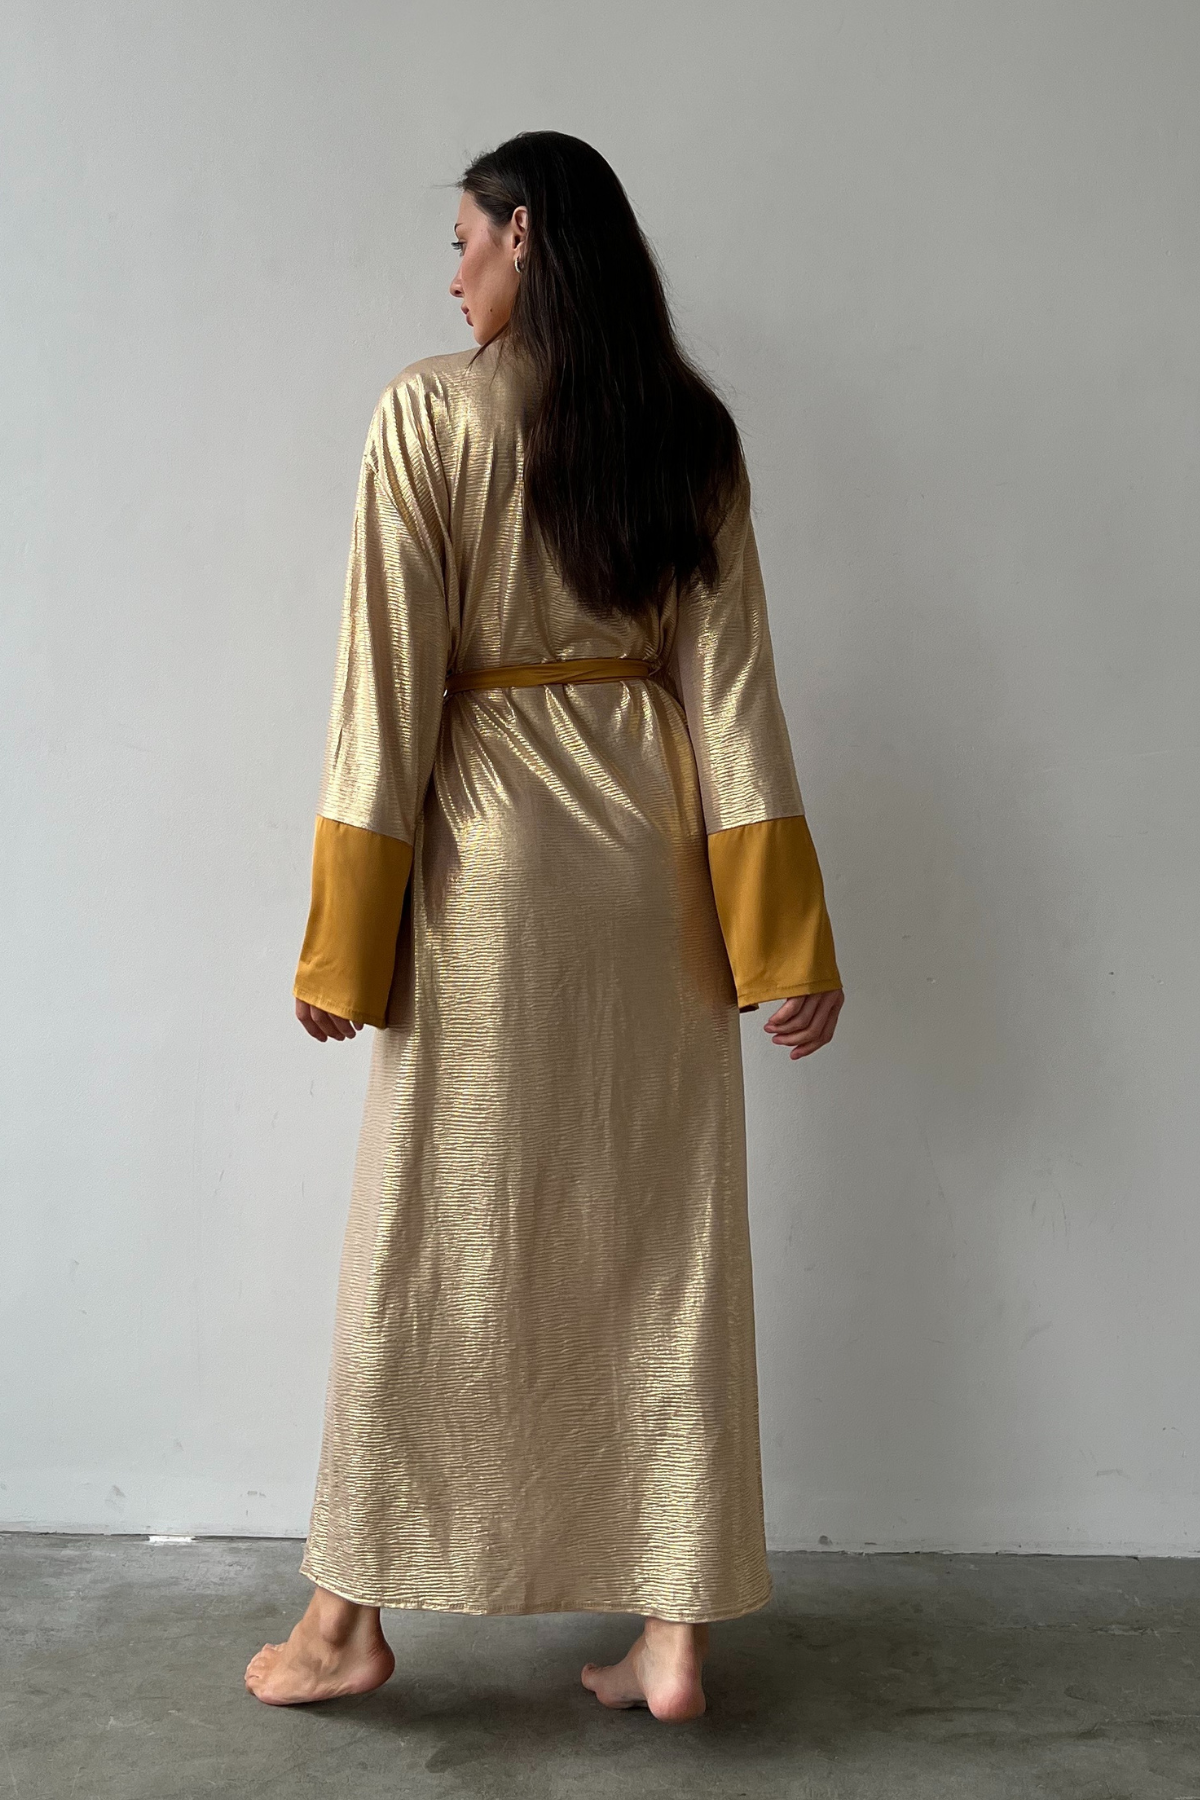 Serena Golden Robe by Angie's Showroom